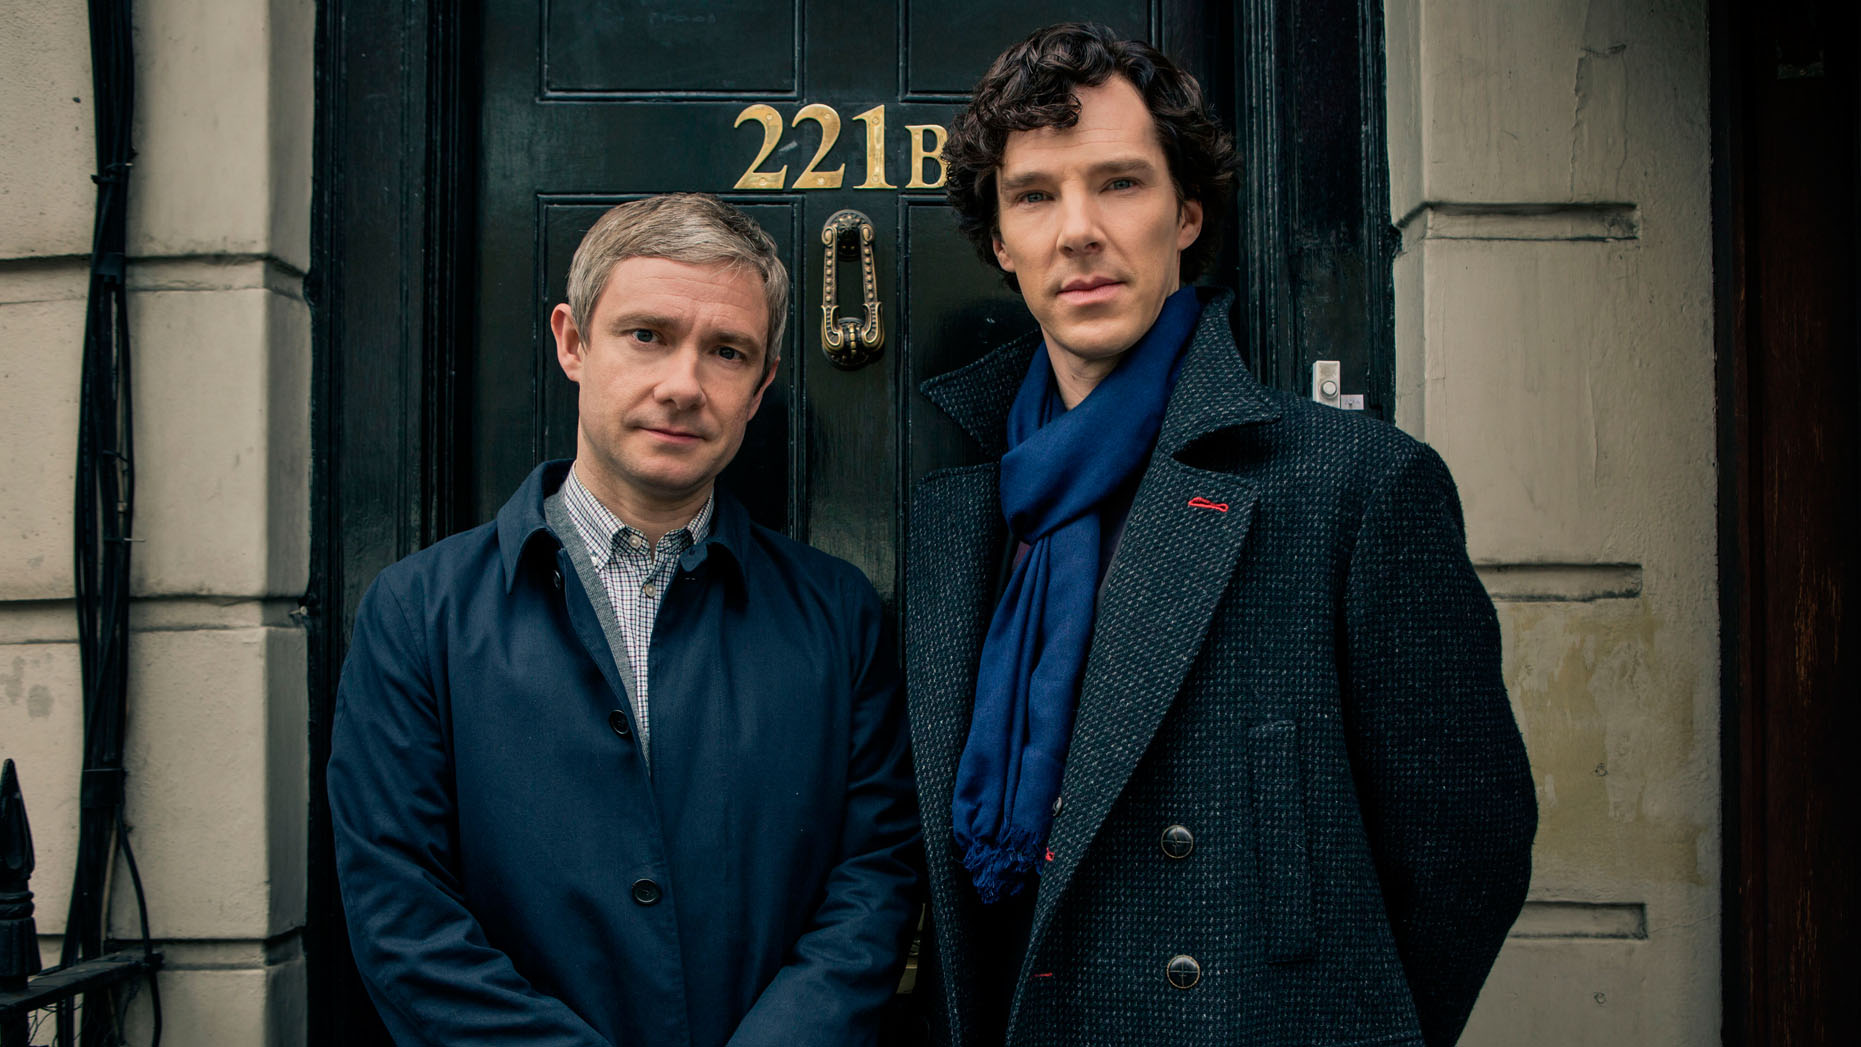 missing-sherlock-here-are-6-eccentric-detective-shows-to-scratch-the